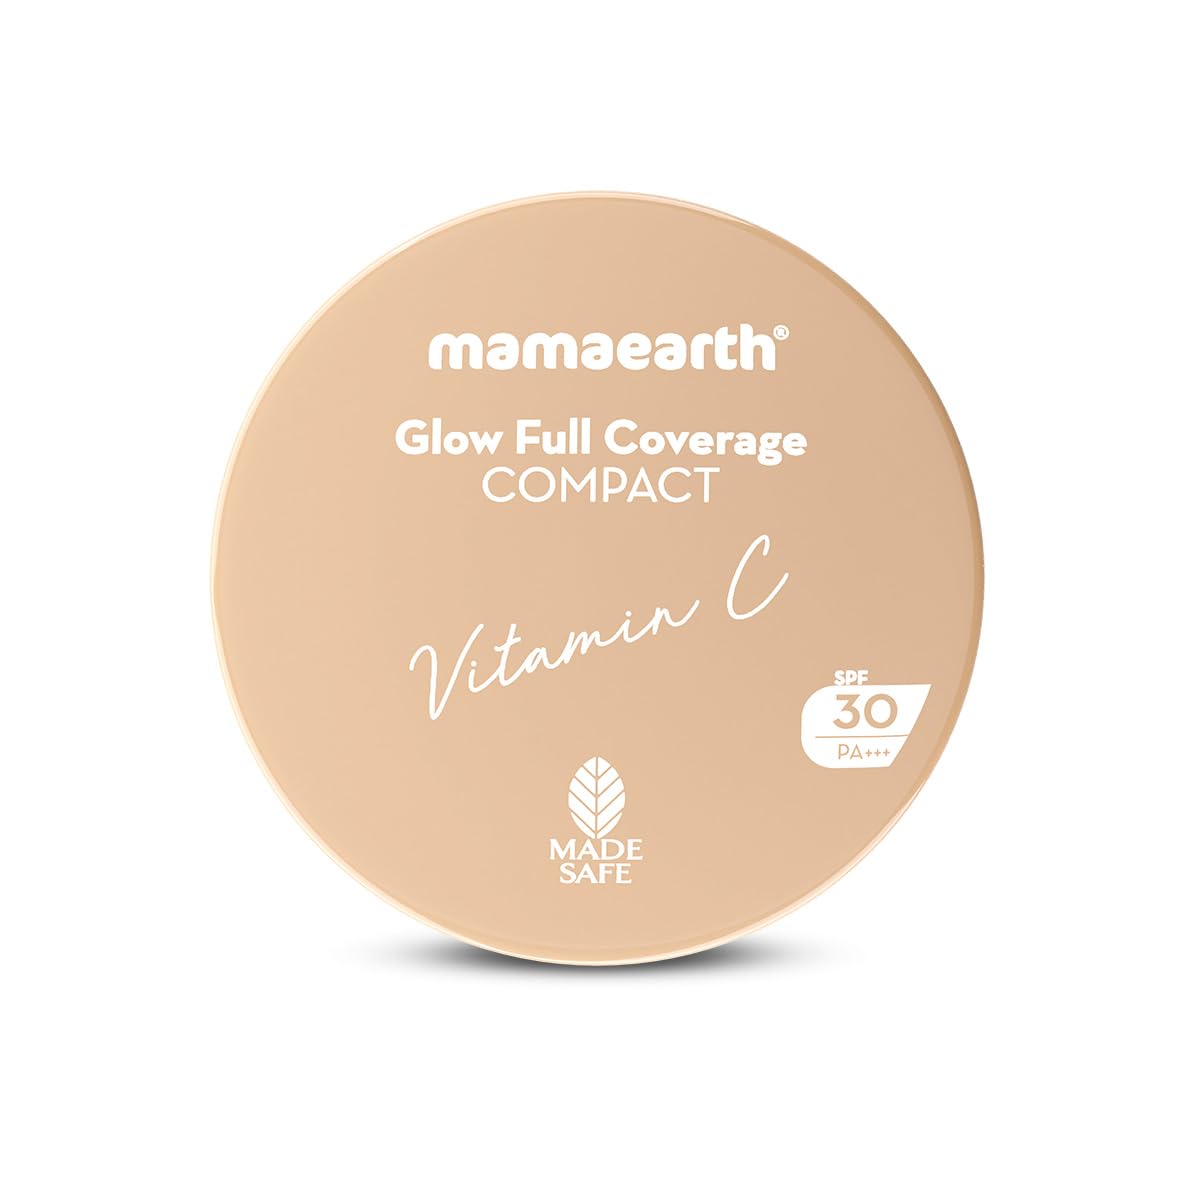 Mamaearth Glow Full Coverage Compact SPF 30 with Vitamin C & Turmeric for up to 3X Instant Glow - 9 g | Even Toned Complexion | Mattifying| Up to 16-Hour Oil Control & Sweat-Resistant (Ivory Glow)